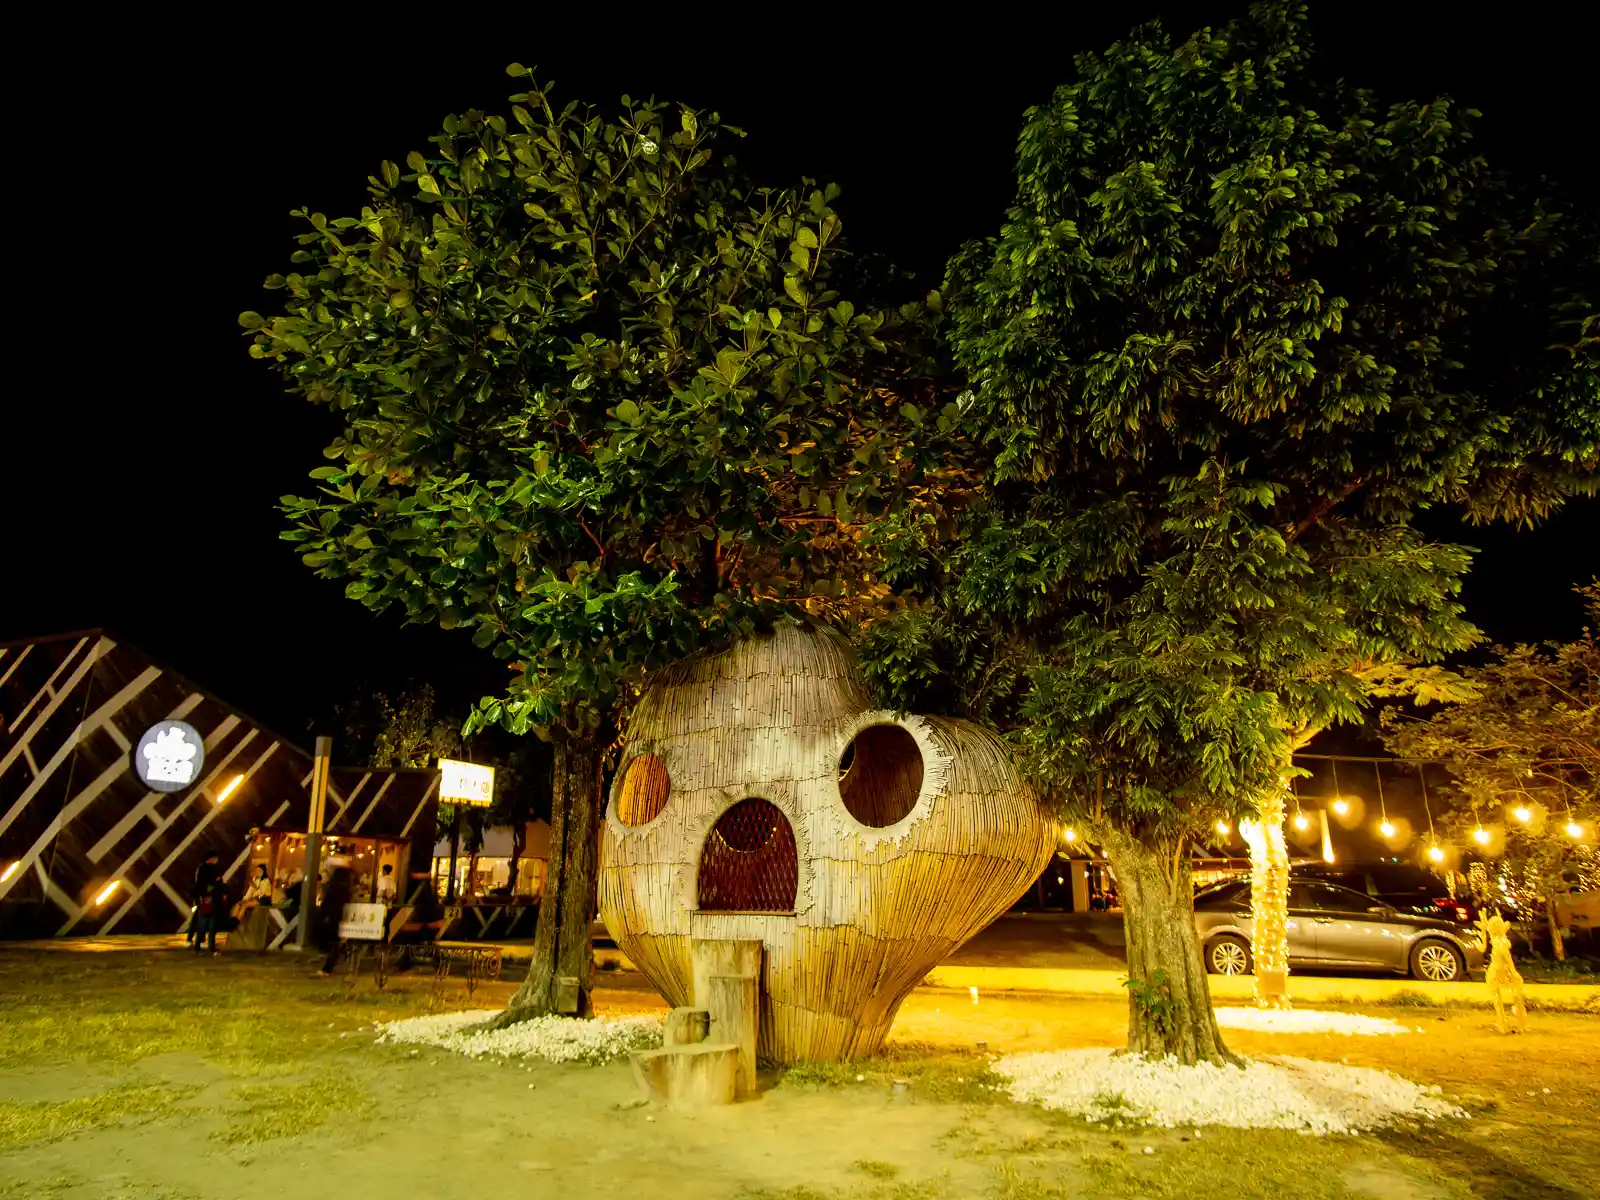 An artistic bamboo hut, shaped like a round face complete with eyes and mouth stands between two trees.